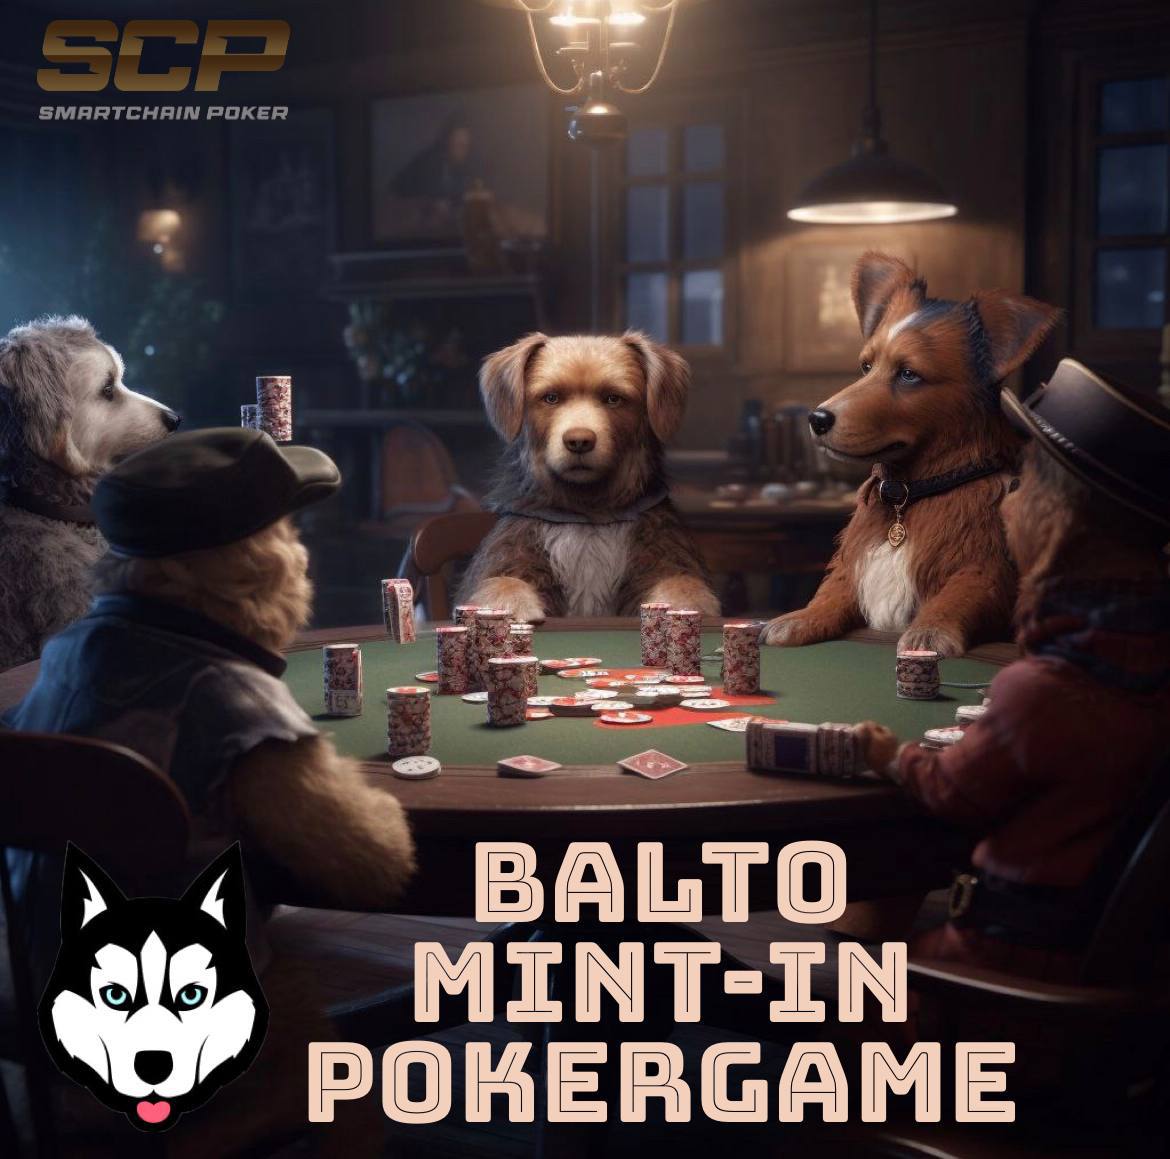 Dont miss an epic private game from @baltotoken the only way to get into this exclusive game is by minting an #nft at: baltoalpha.com Game starts at 3et tomorrow! #smartchainpoker $SCP